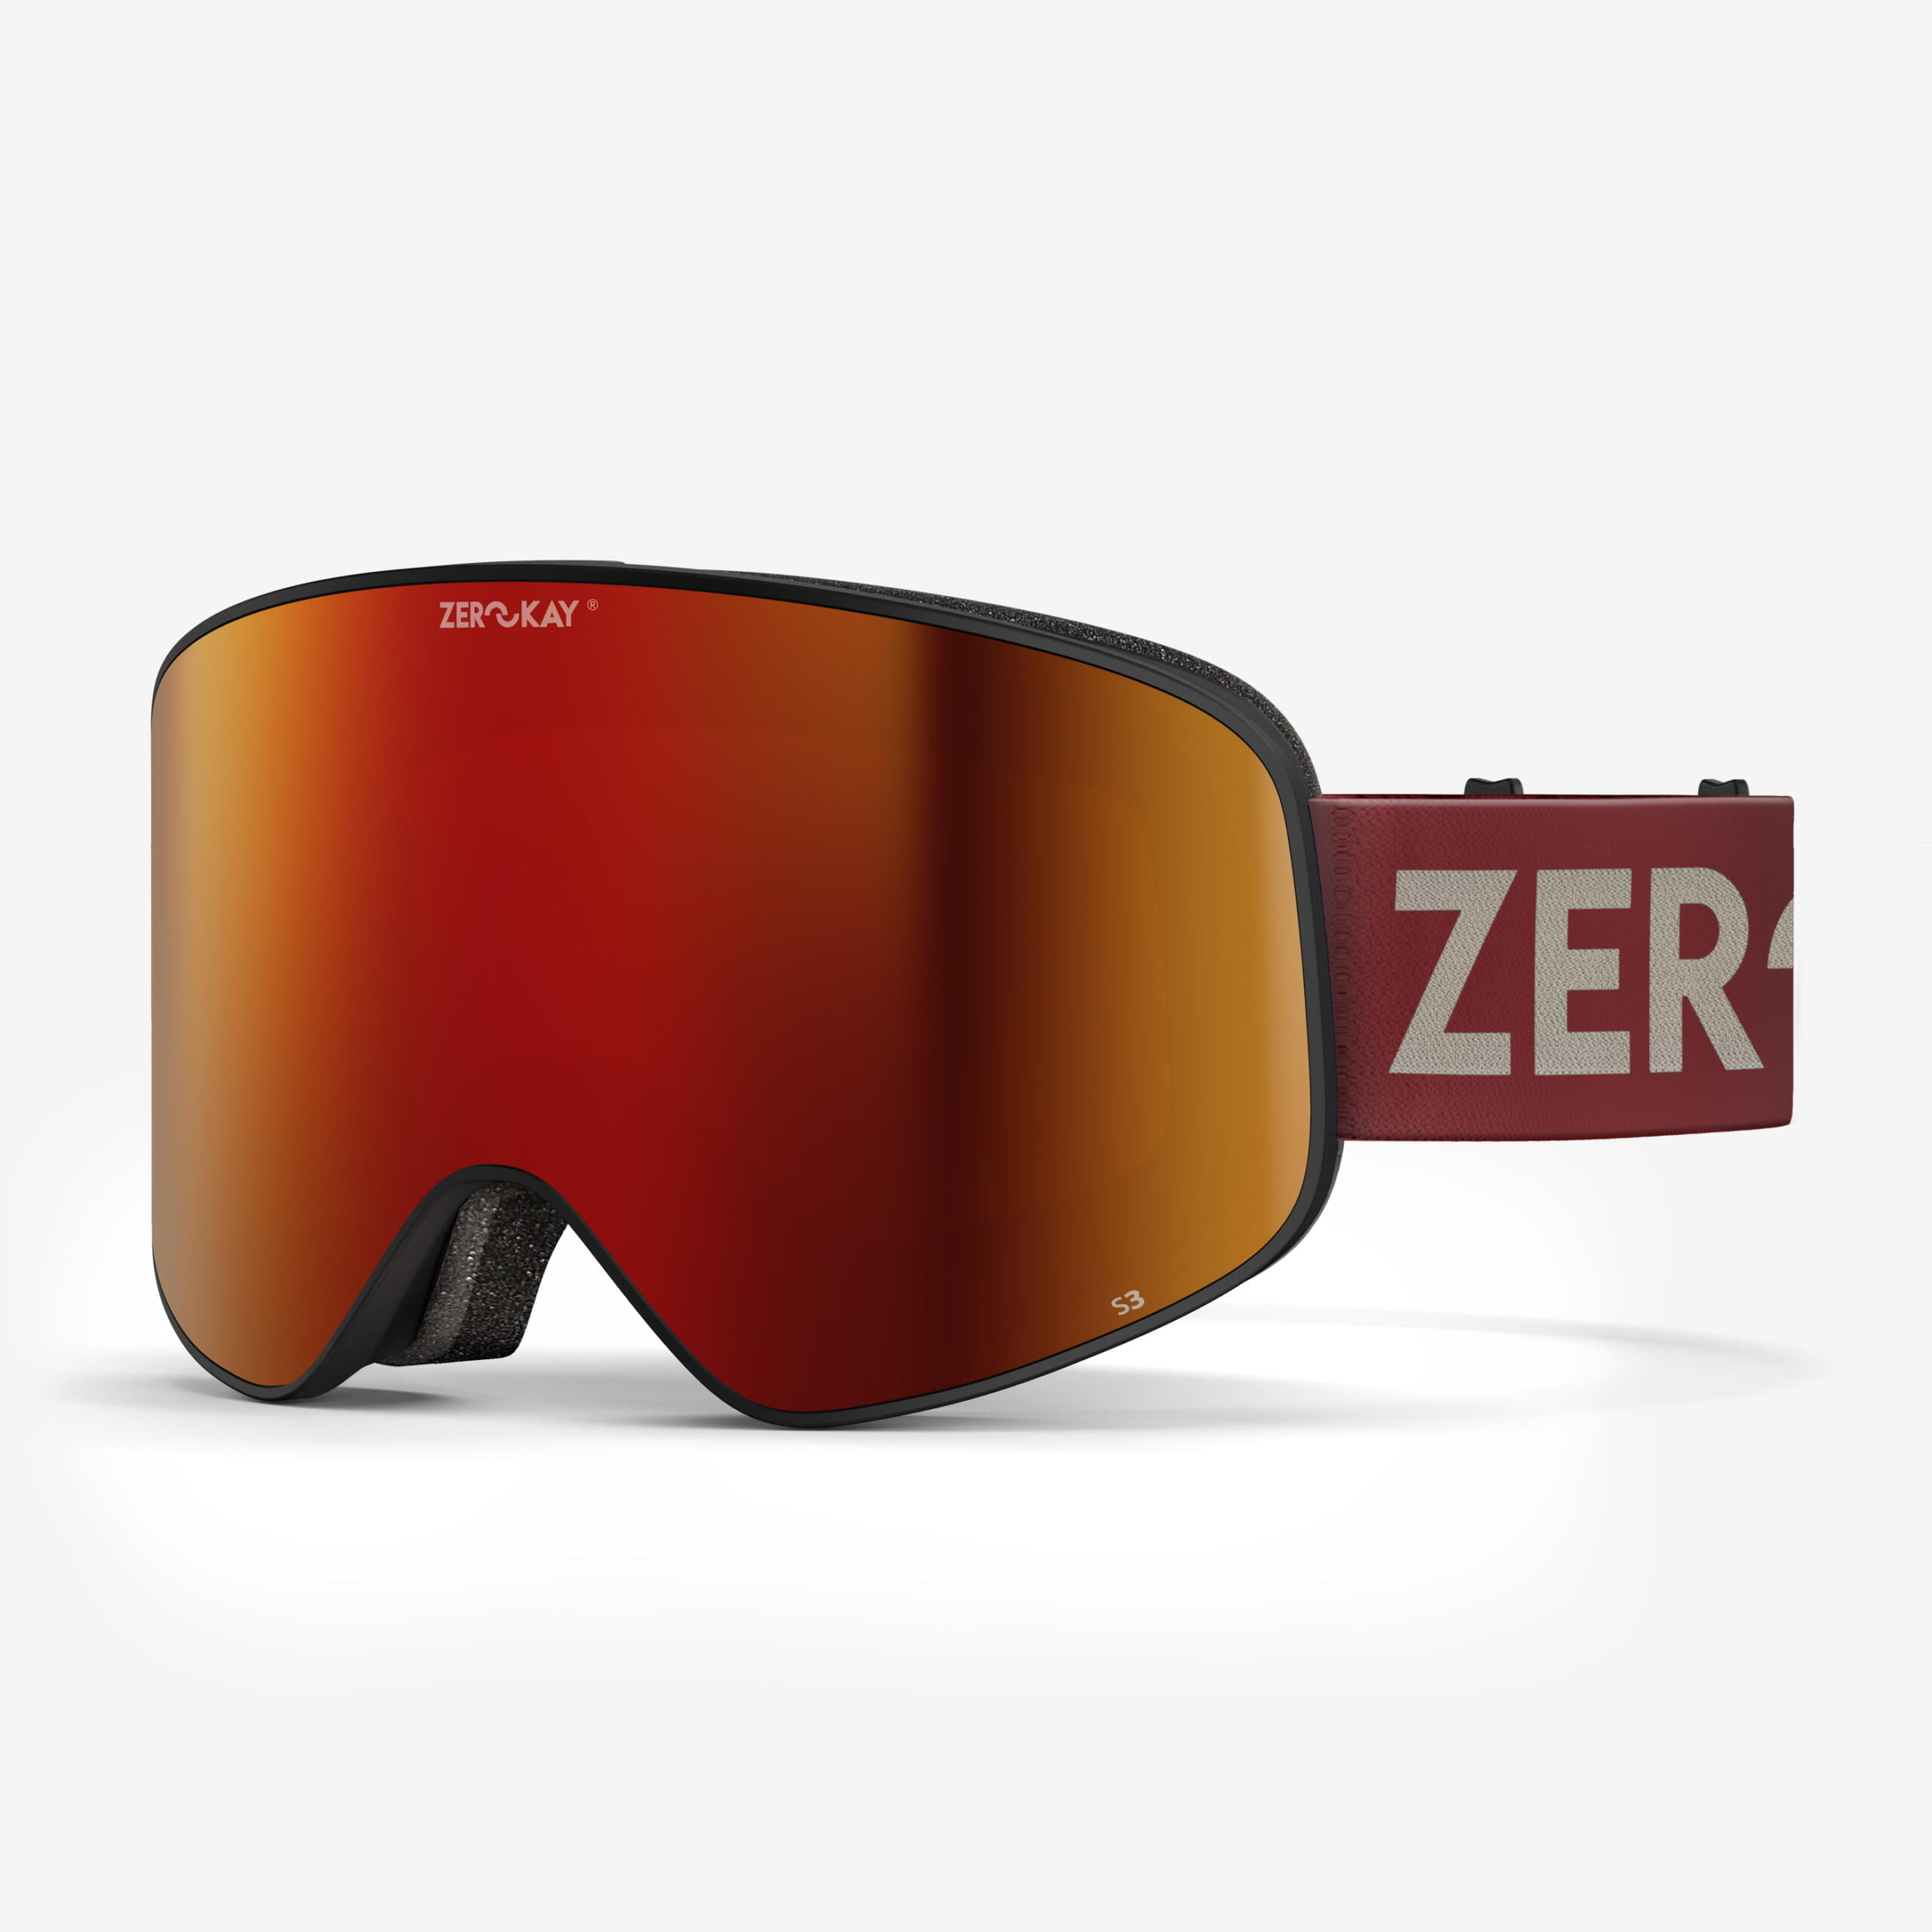 Zerokay Contrast Ski Goggles featuring a red lens and red strap, complete with anti-fog treatment, 3-layer antibacterial foam, and a protective bag for peak performance.